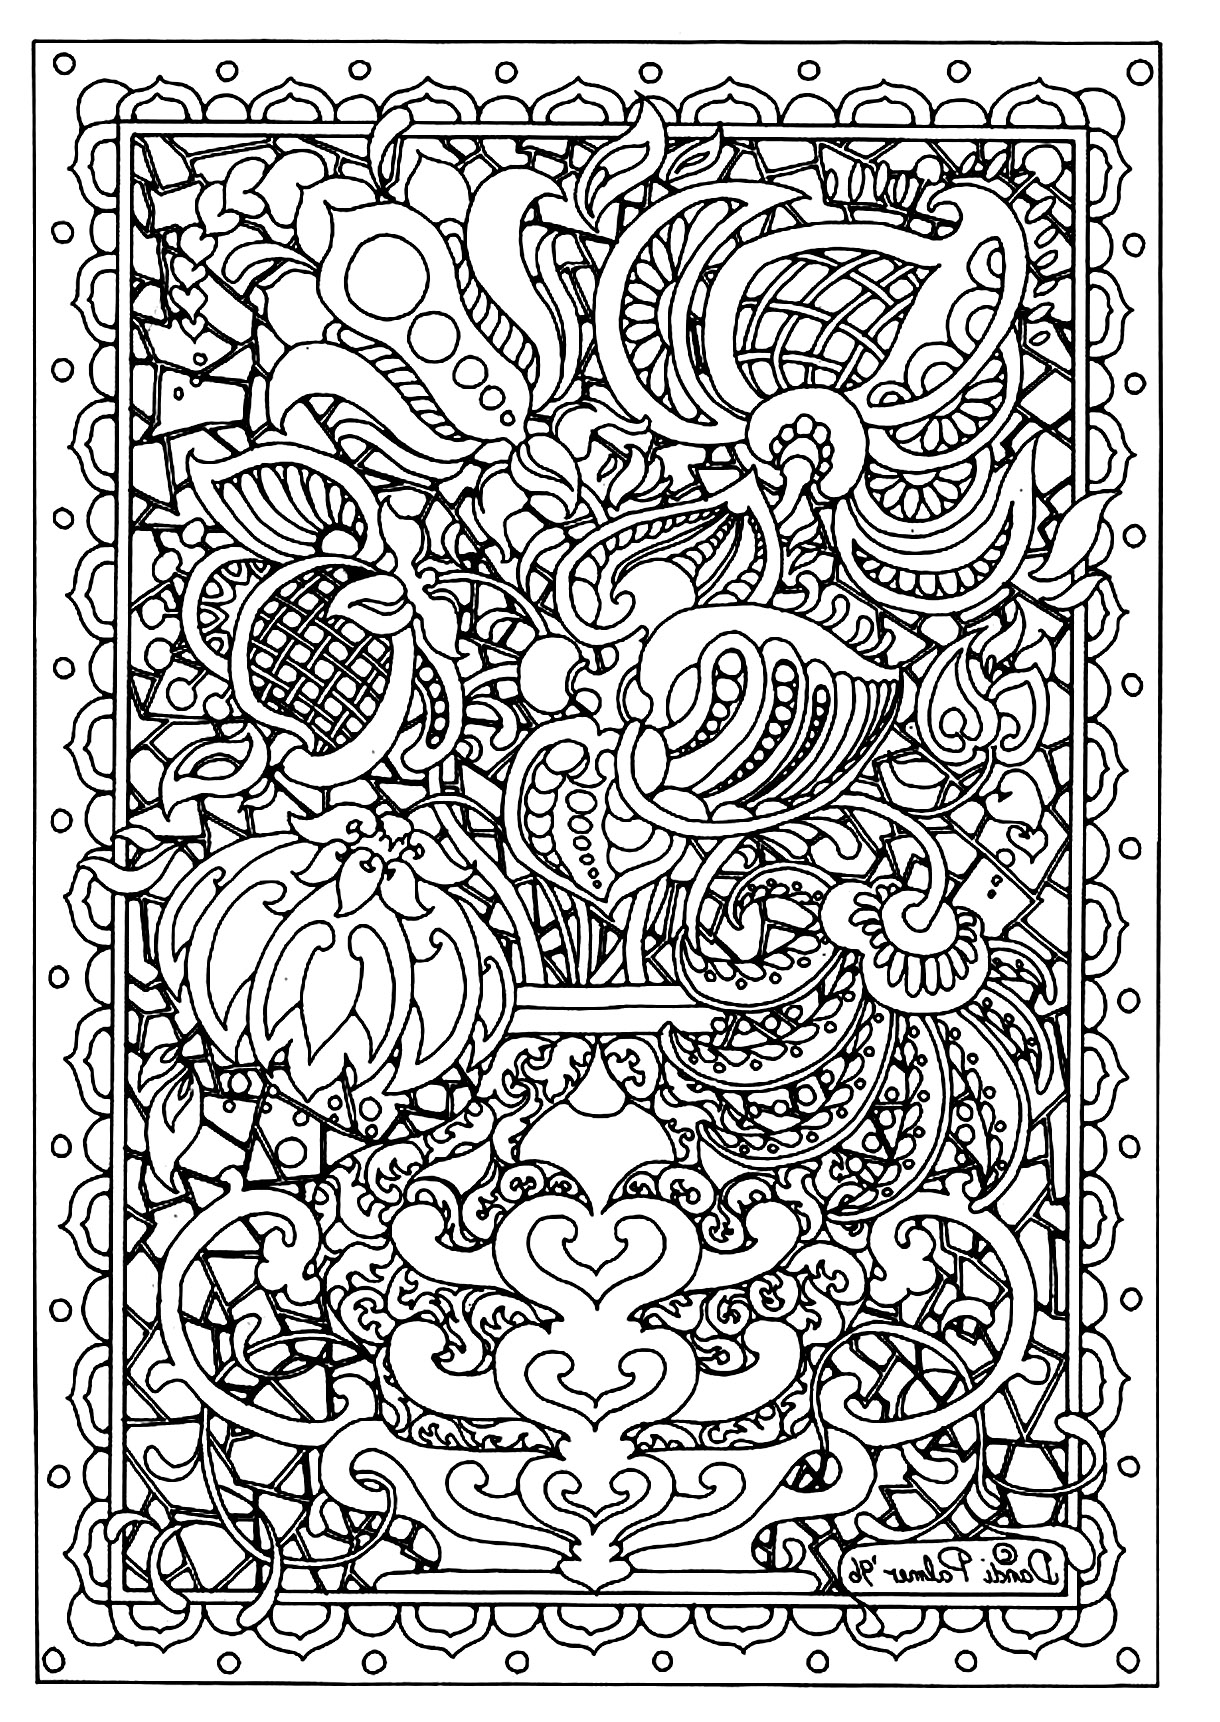 Difficult coloring page of flowers, free to print